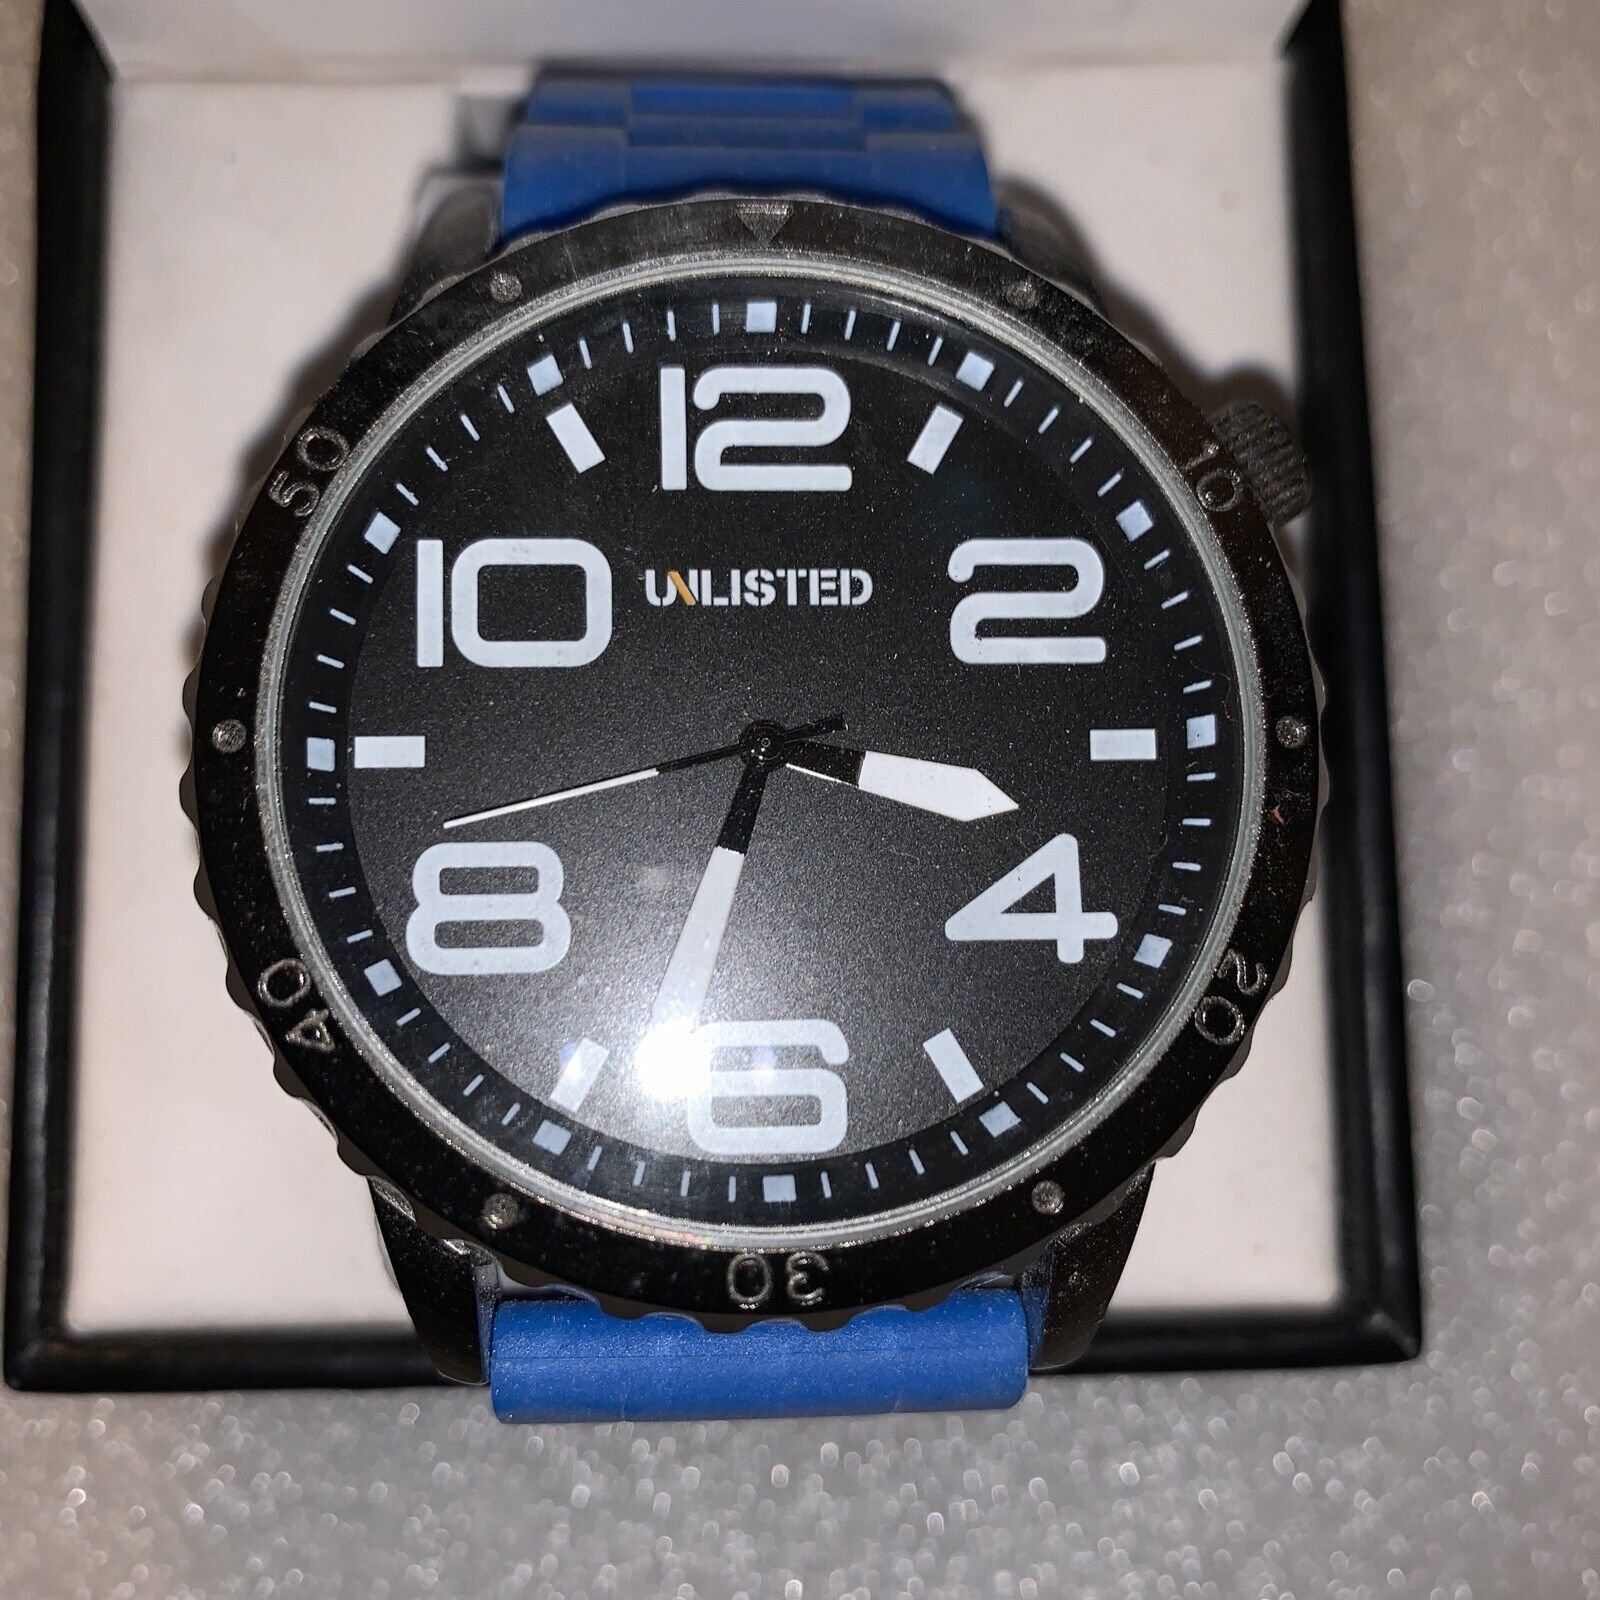 UNLISTED KENNETH COLE Mens Watch Black Big Face Blue Silicone Band UL1301